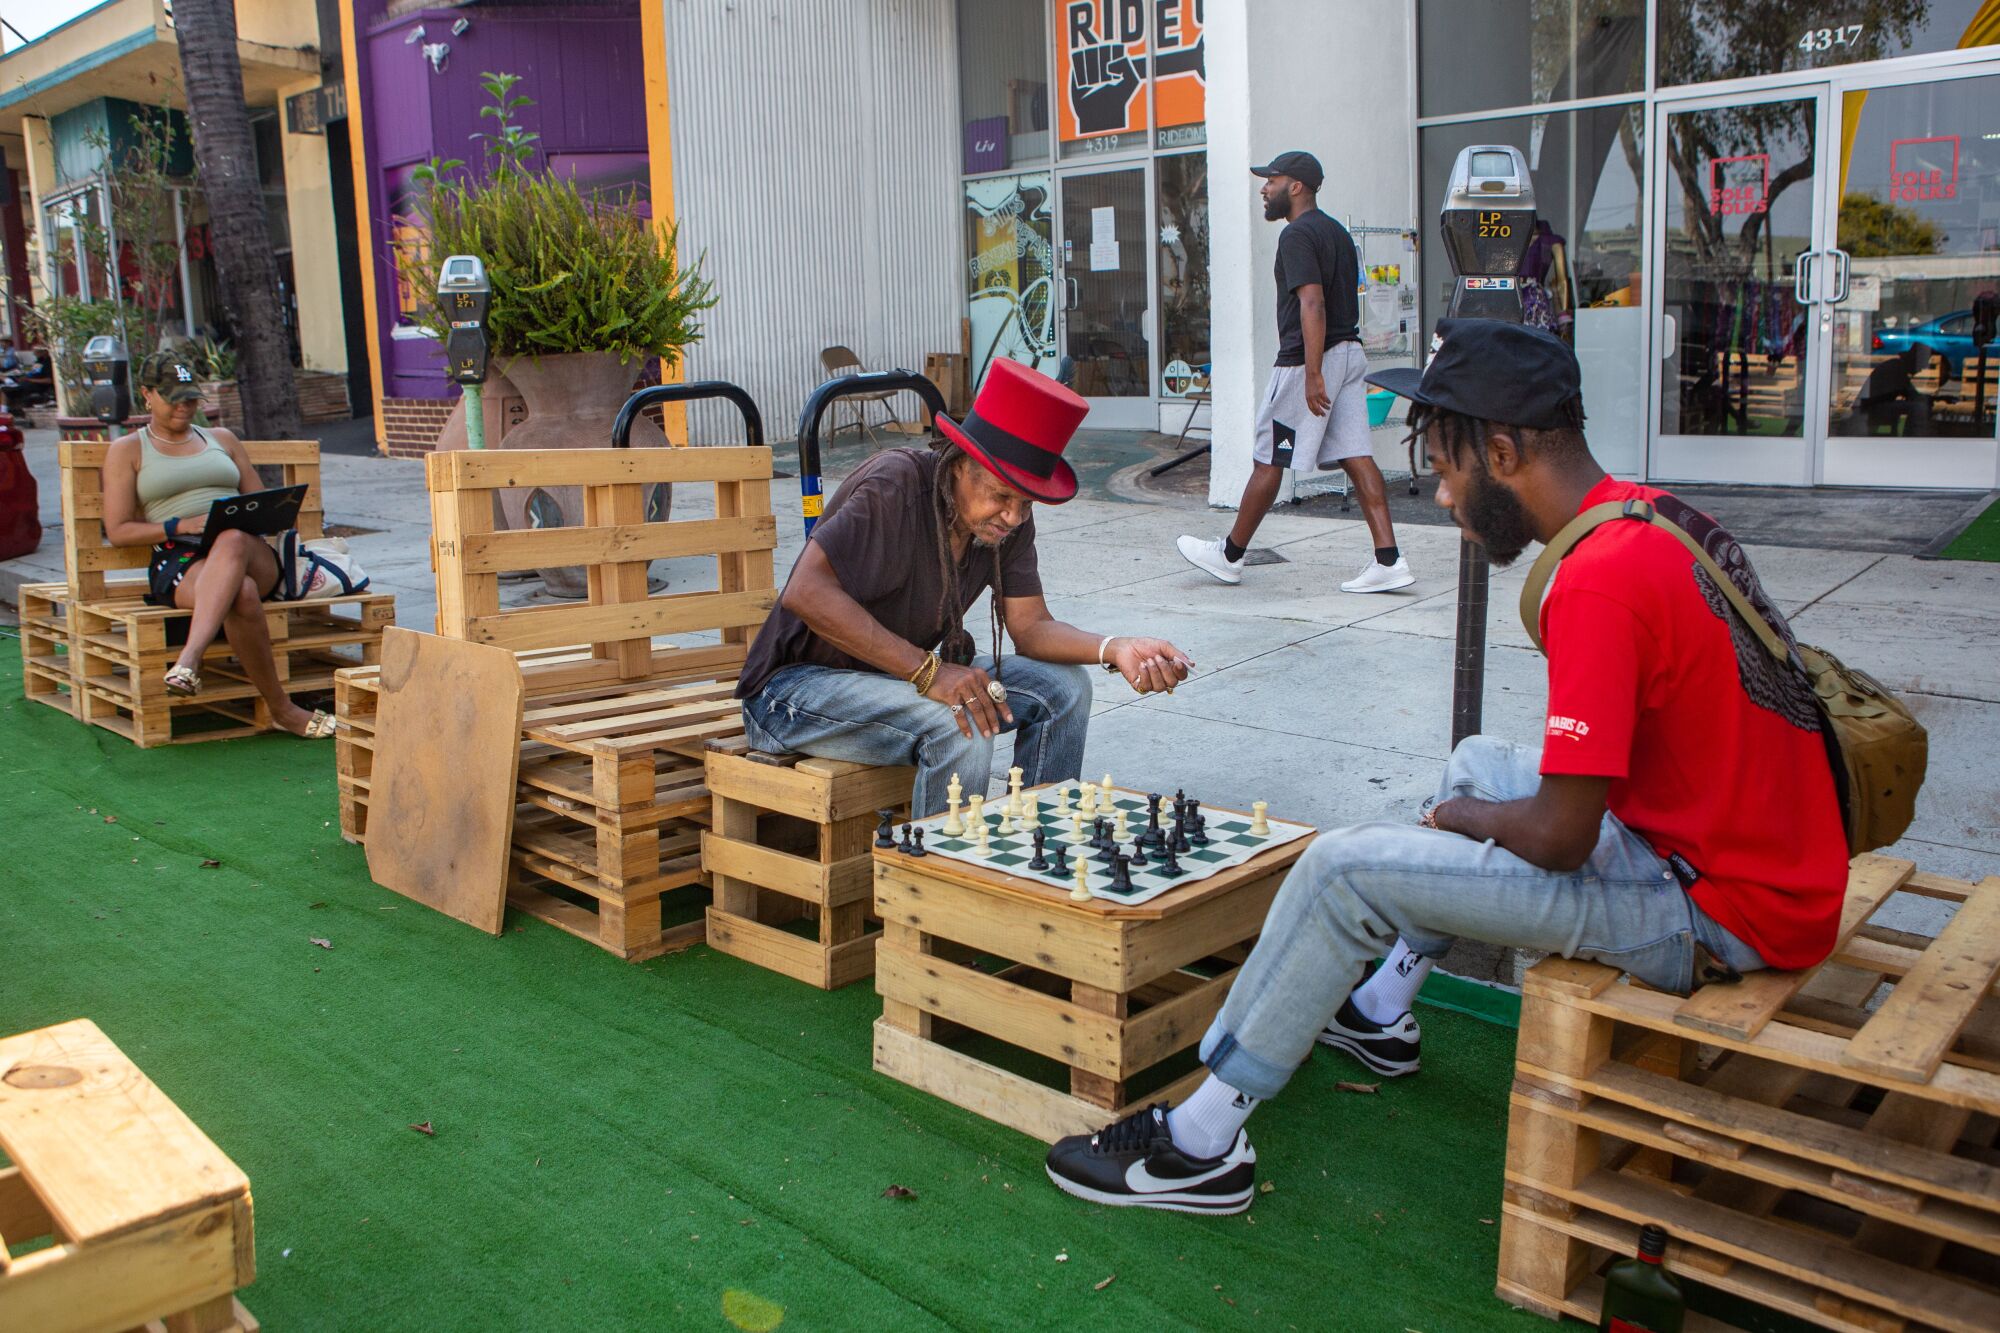 Two people play chess on wooden furniture set up on the street